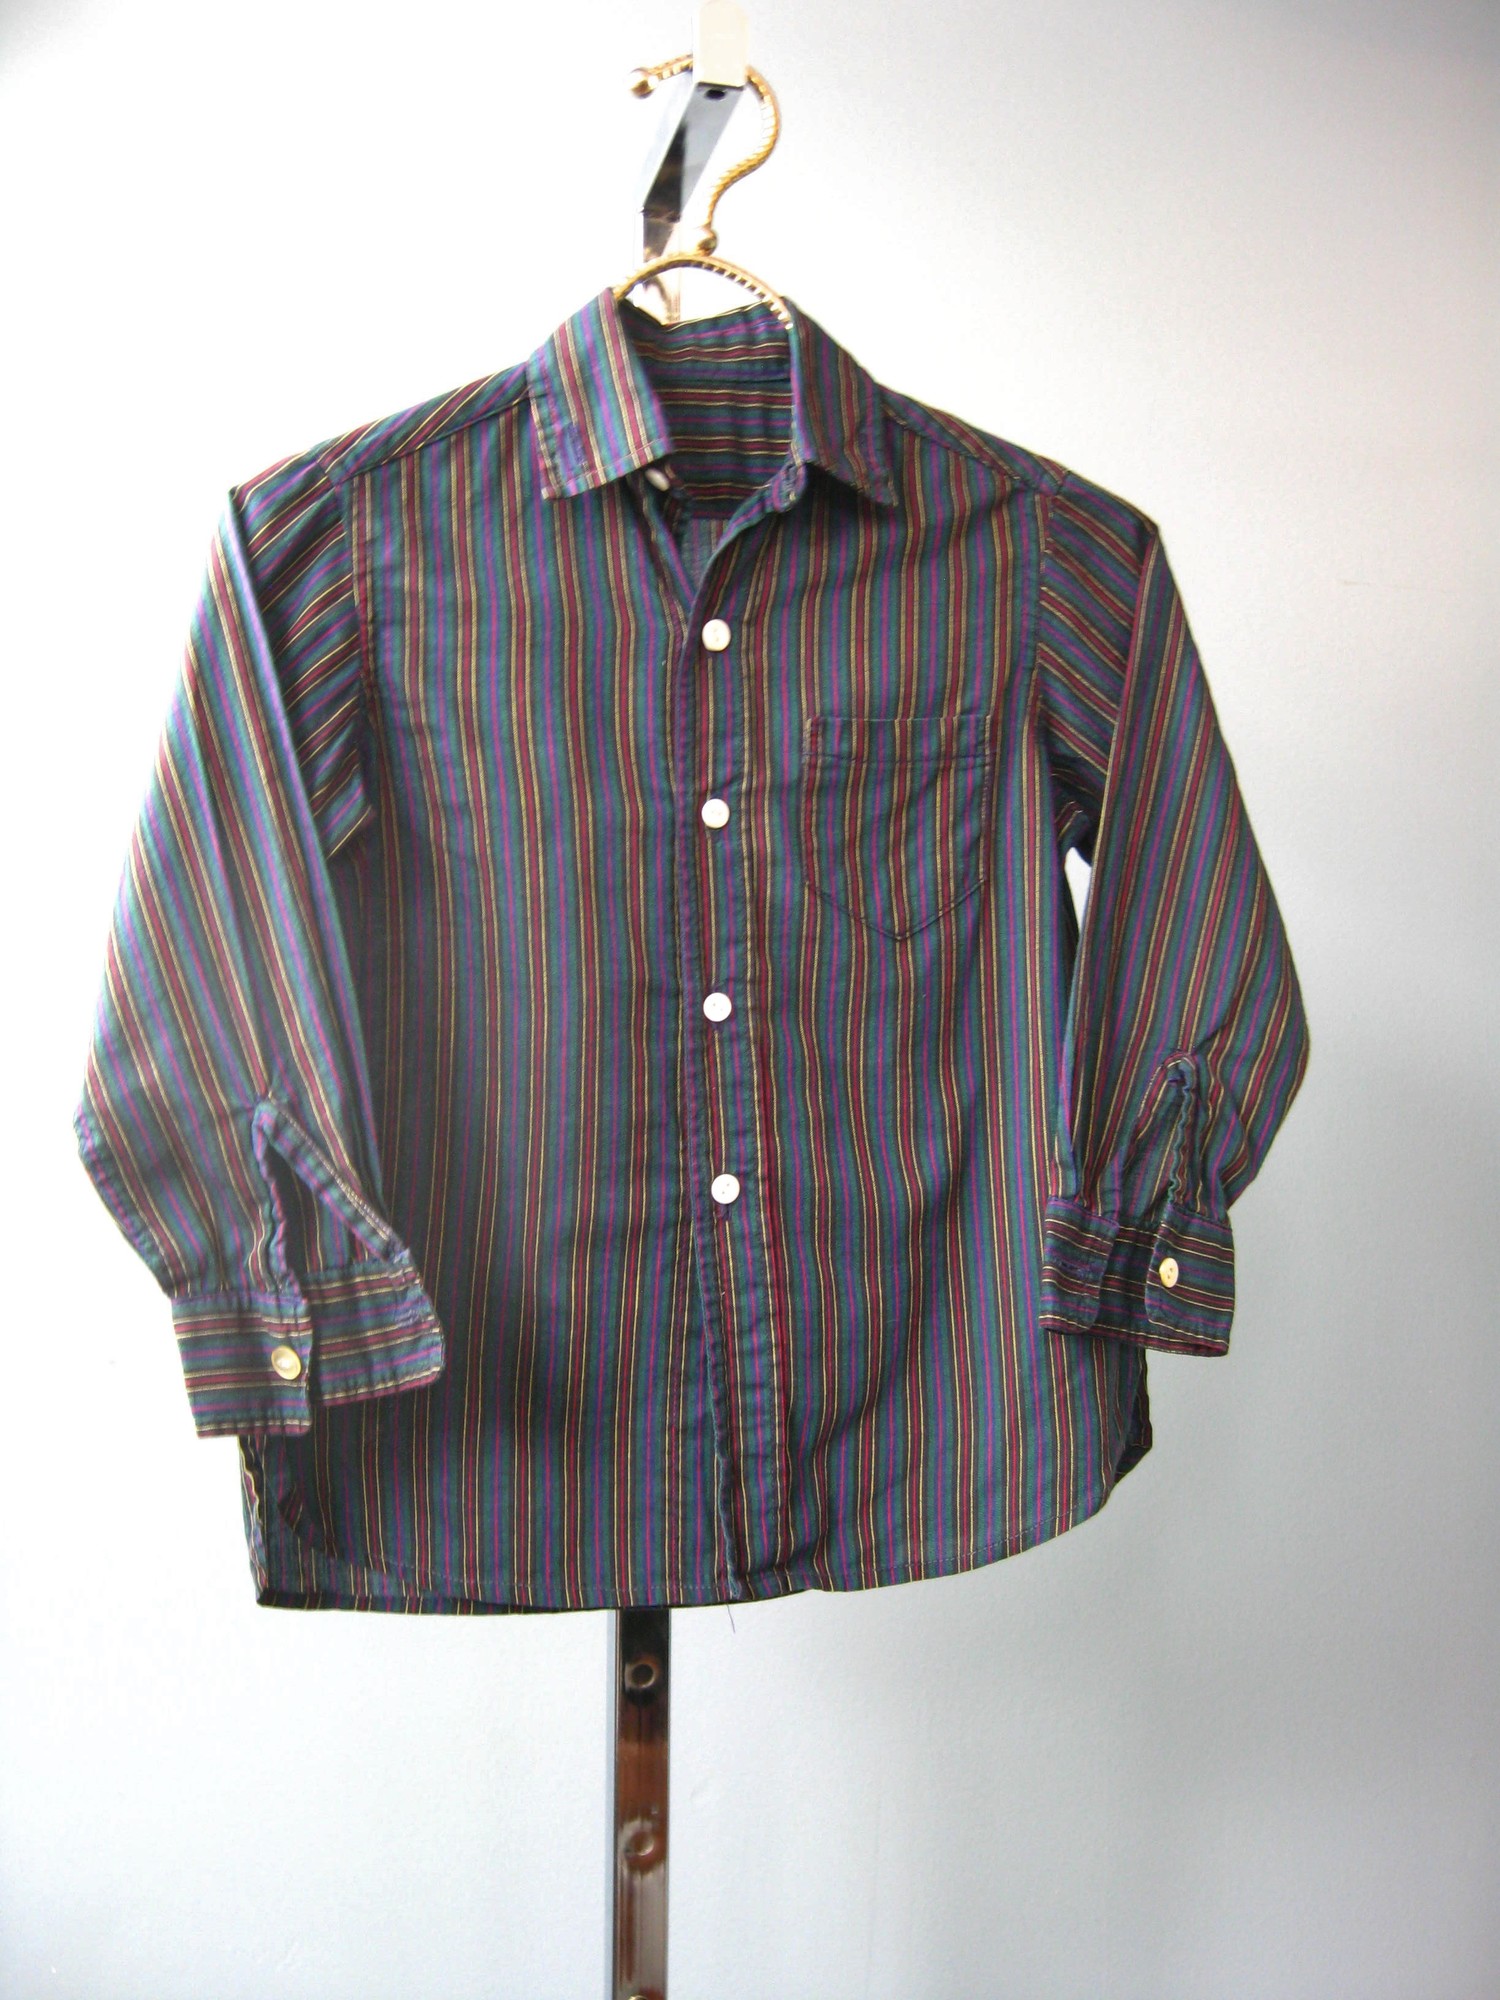 Here's a nice cotton button down shirt for your little gentleman.
Dark Blue cotton with red yellow and white narrow stripes.
Button Cuffs
Little Chest pocket.

Measurements:
Chest : 24in
Length: 17 1/2in
Neck: 11in
Sleeve: 14in

This should fit a toddler size 2T

Thanks for looking!